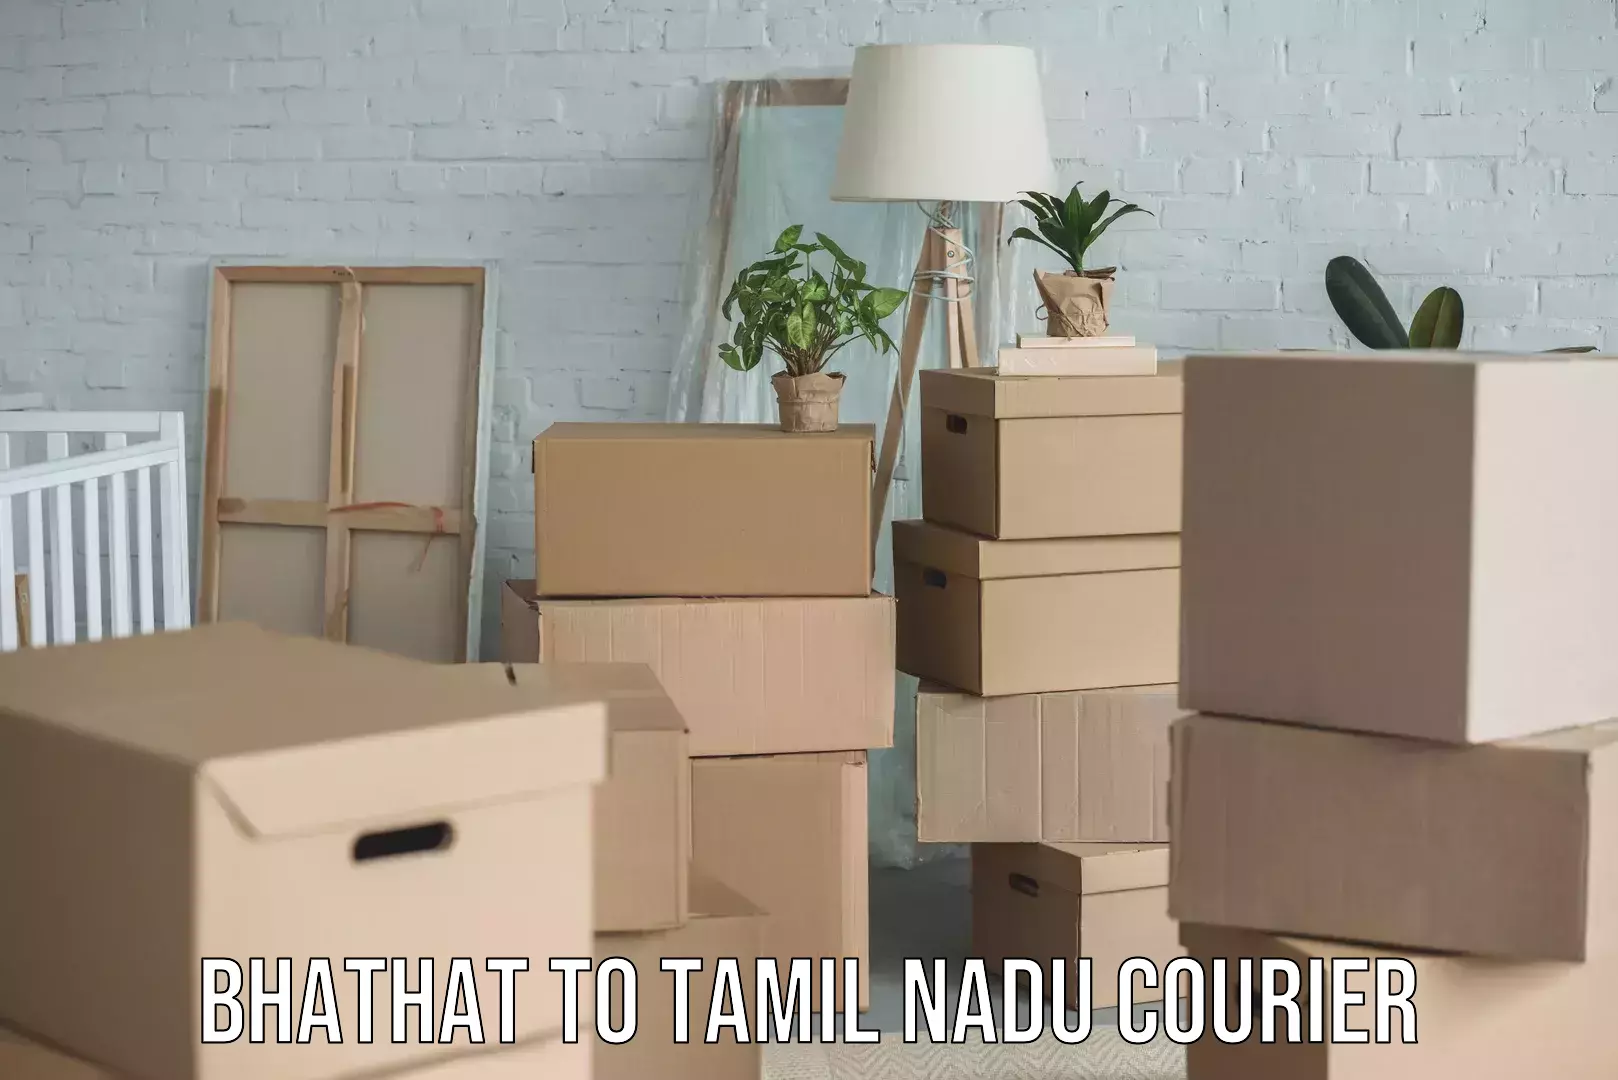 Discounted shipping in Bhathat to Tamil Nadu